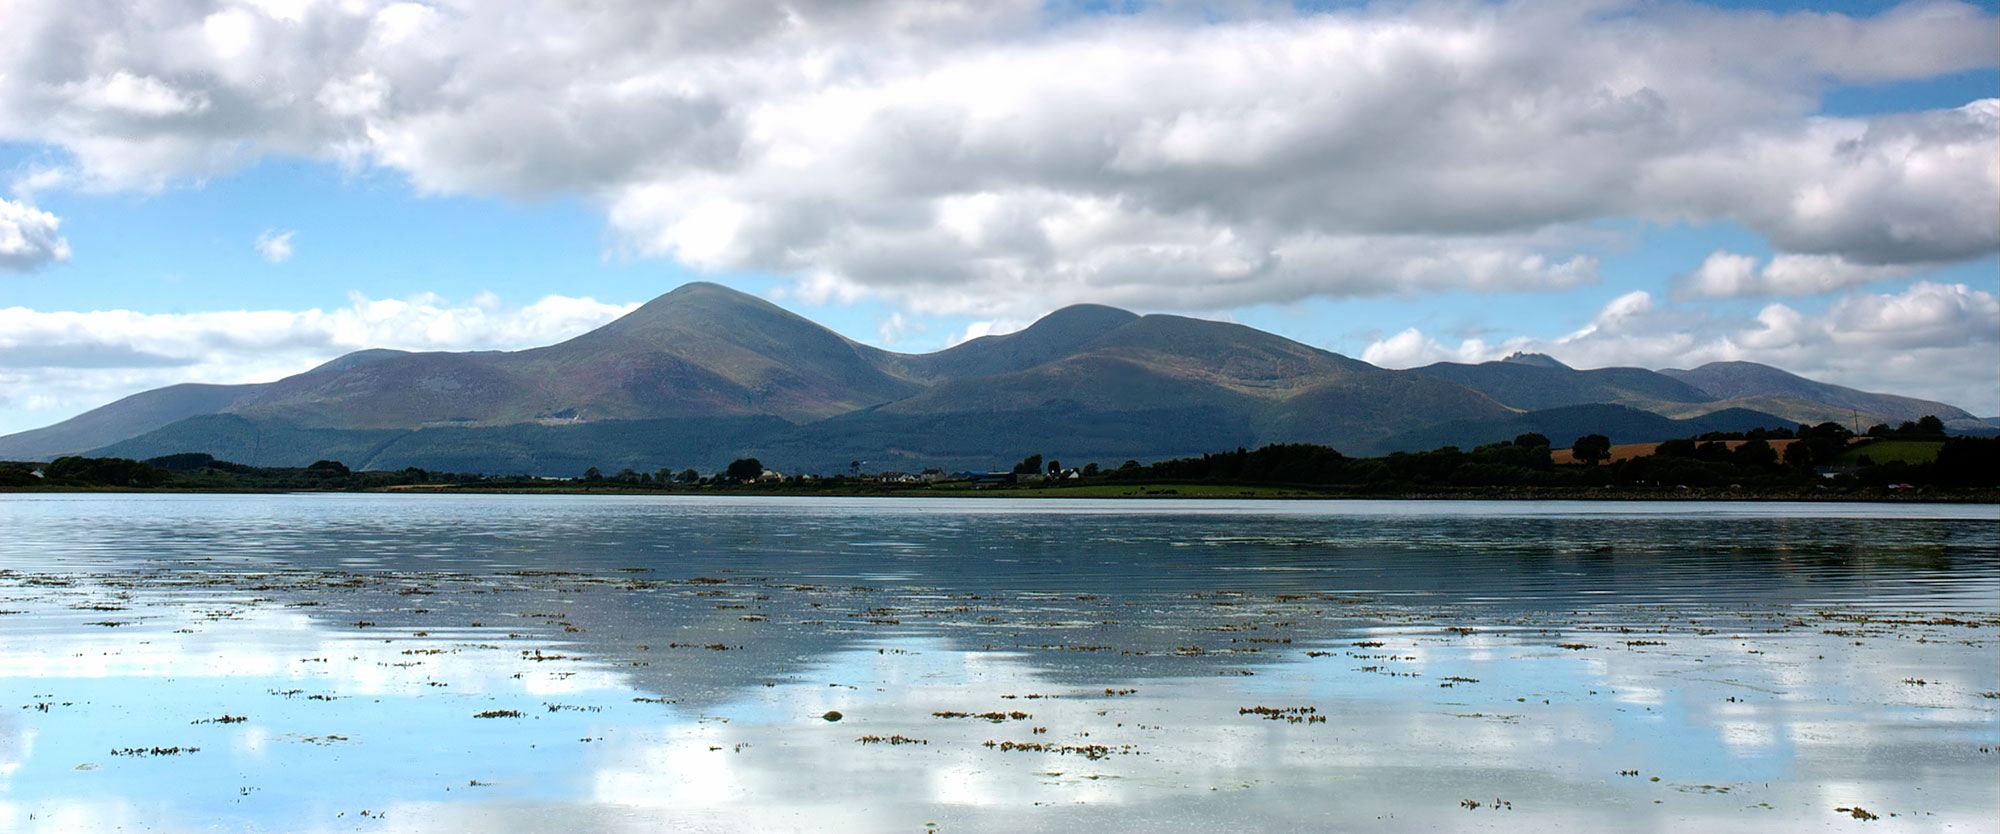 Photograph of Mourne Mountains